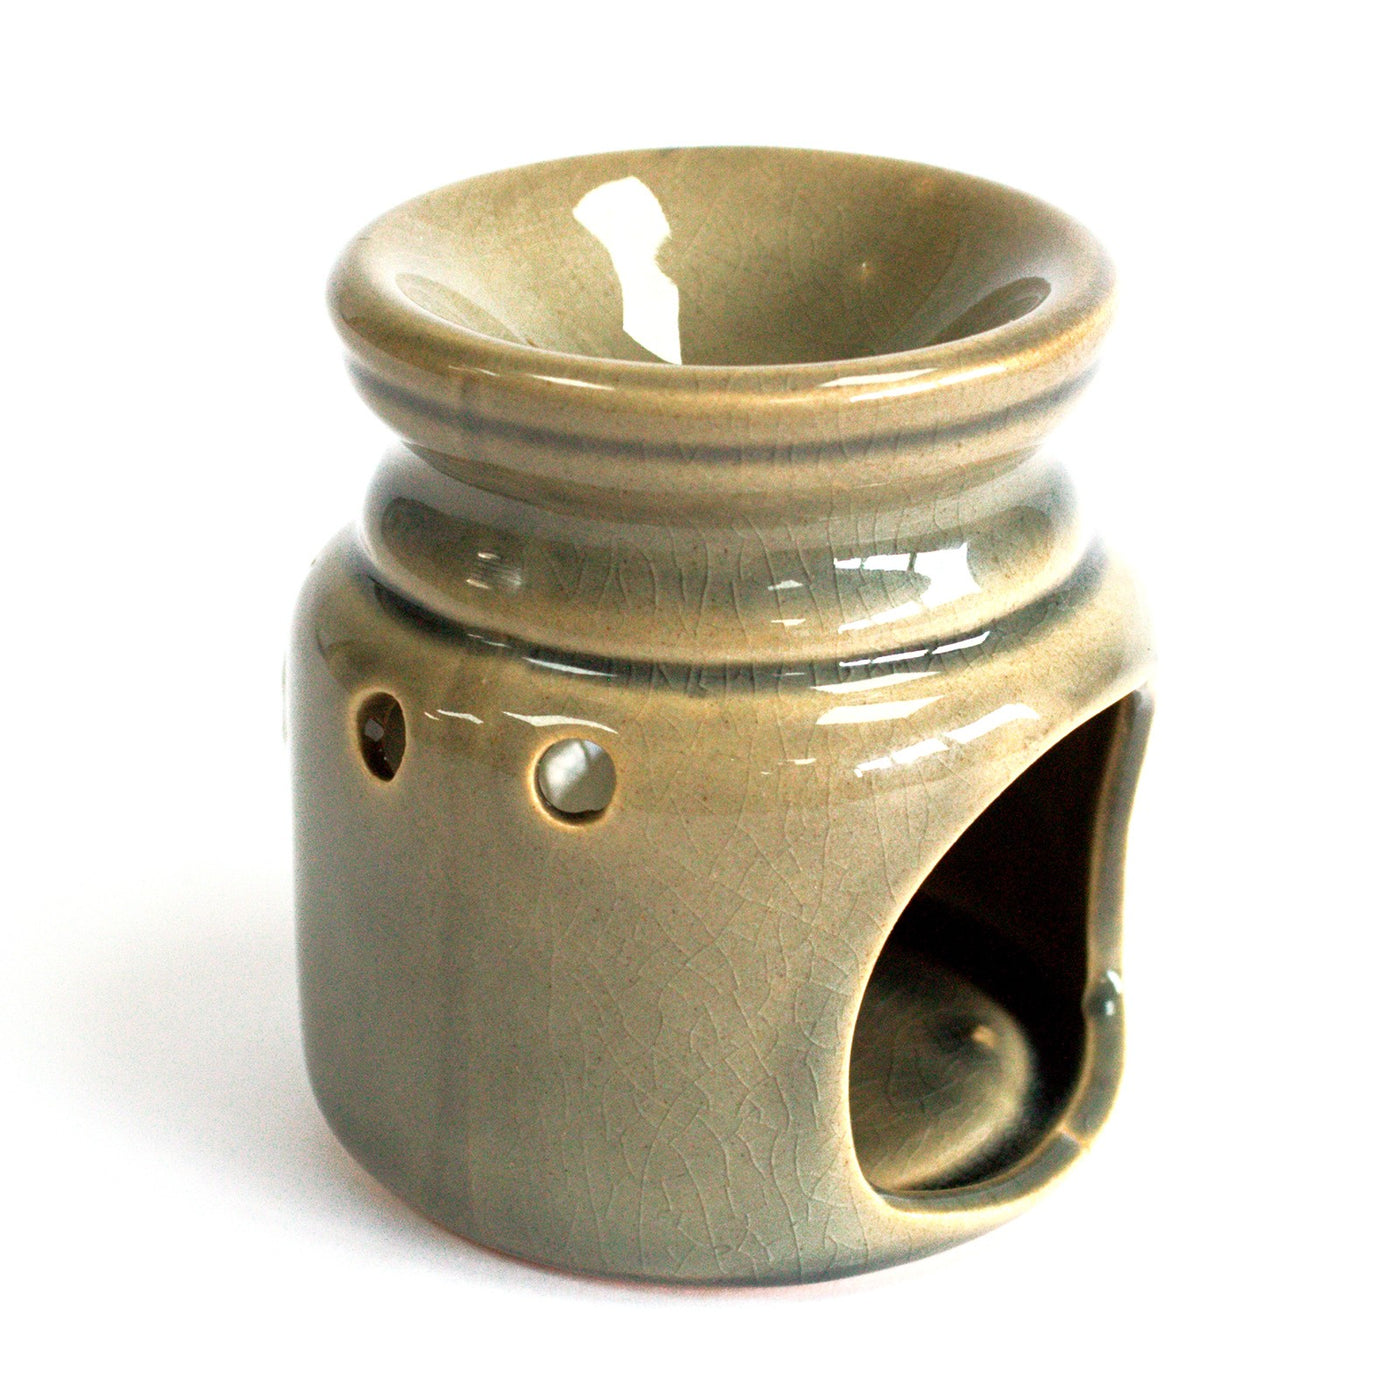 Small Blue Stone Ceramic Vintage Country Oil And Wax Melts Burner Home Design